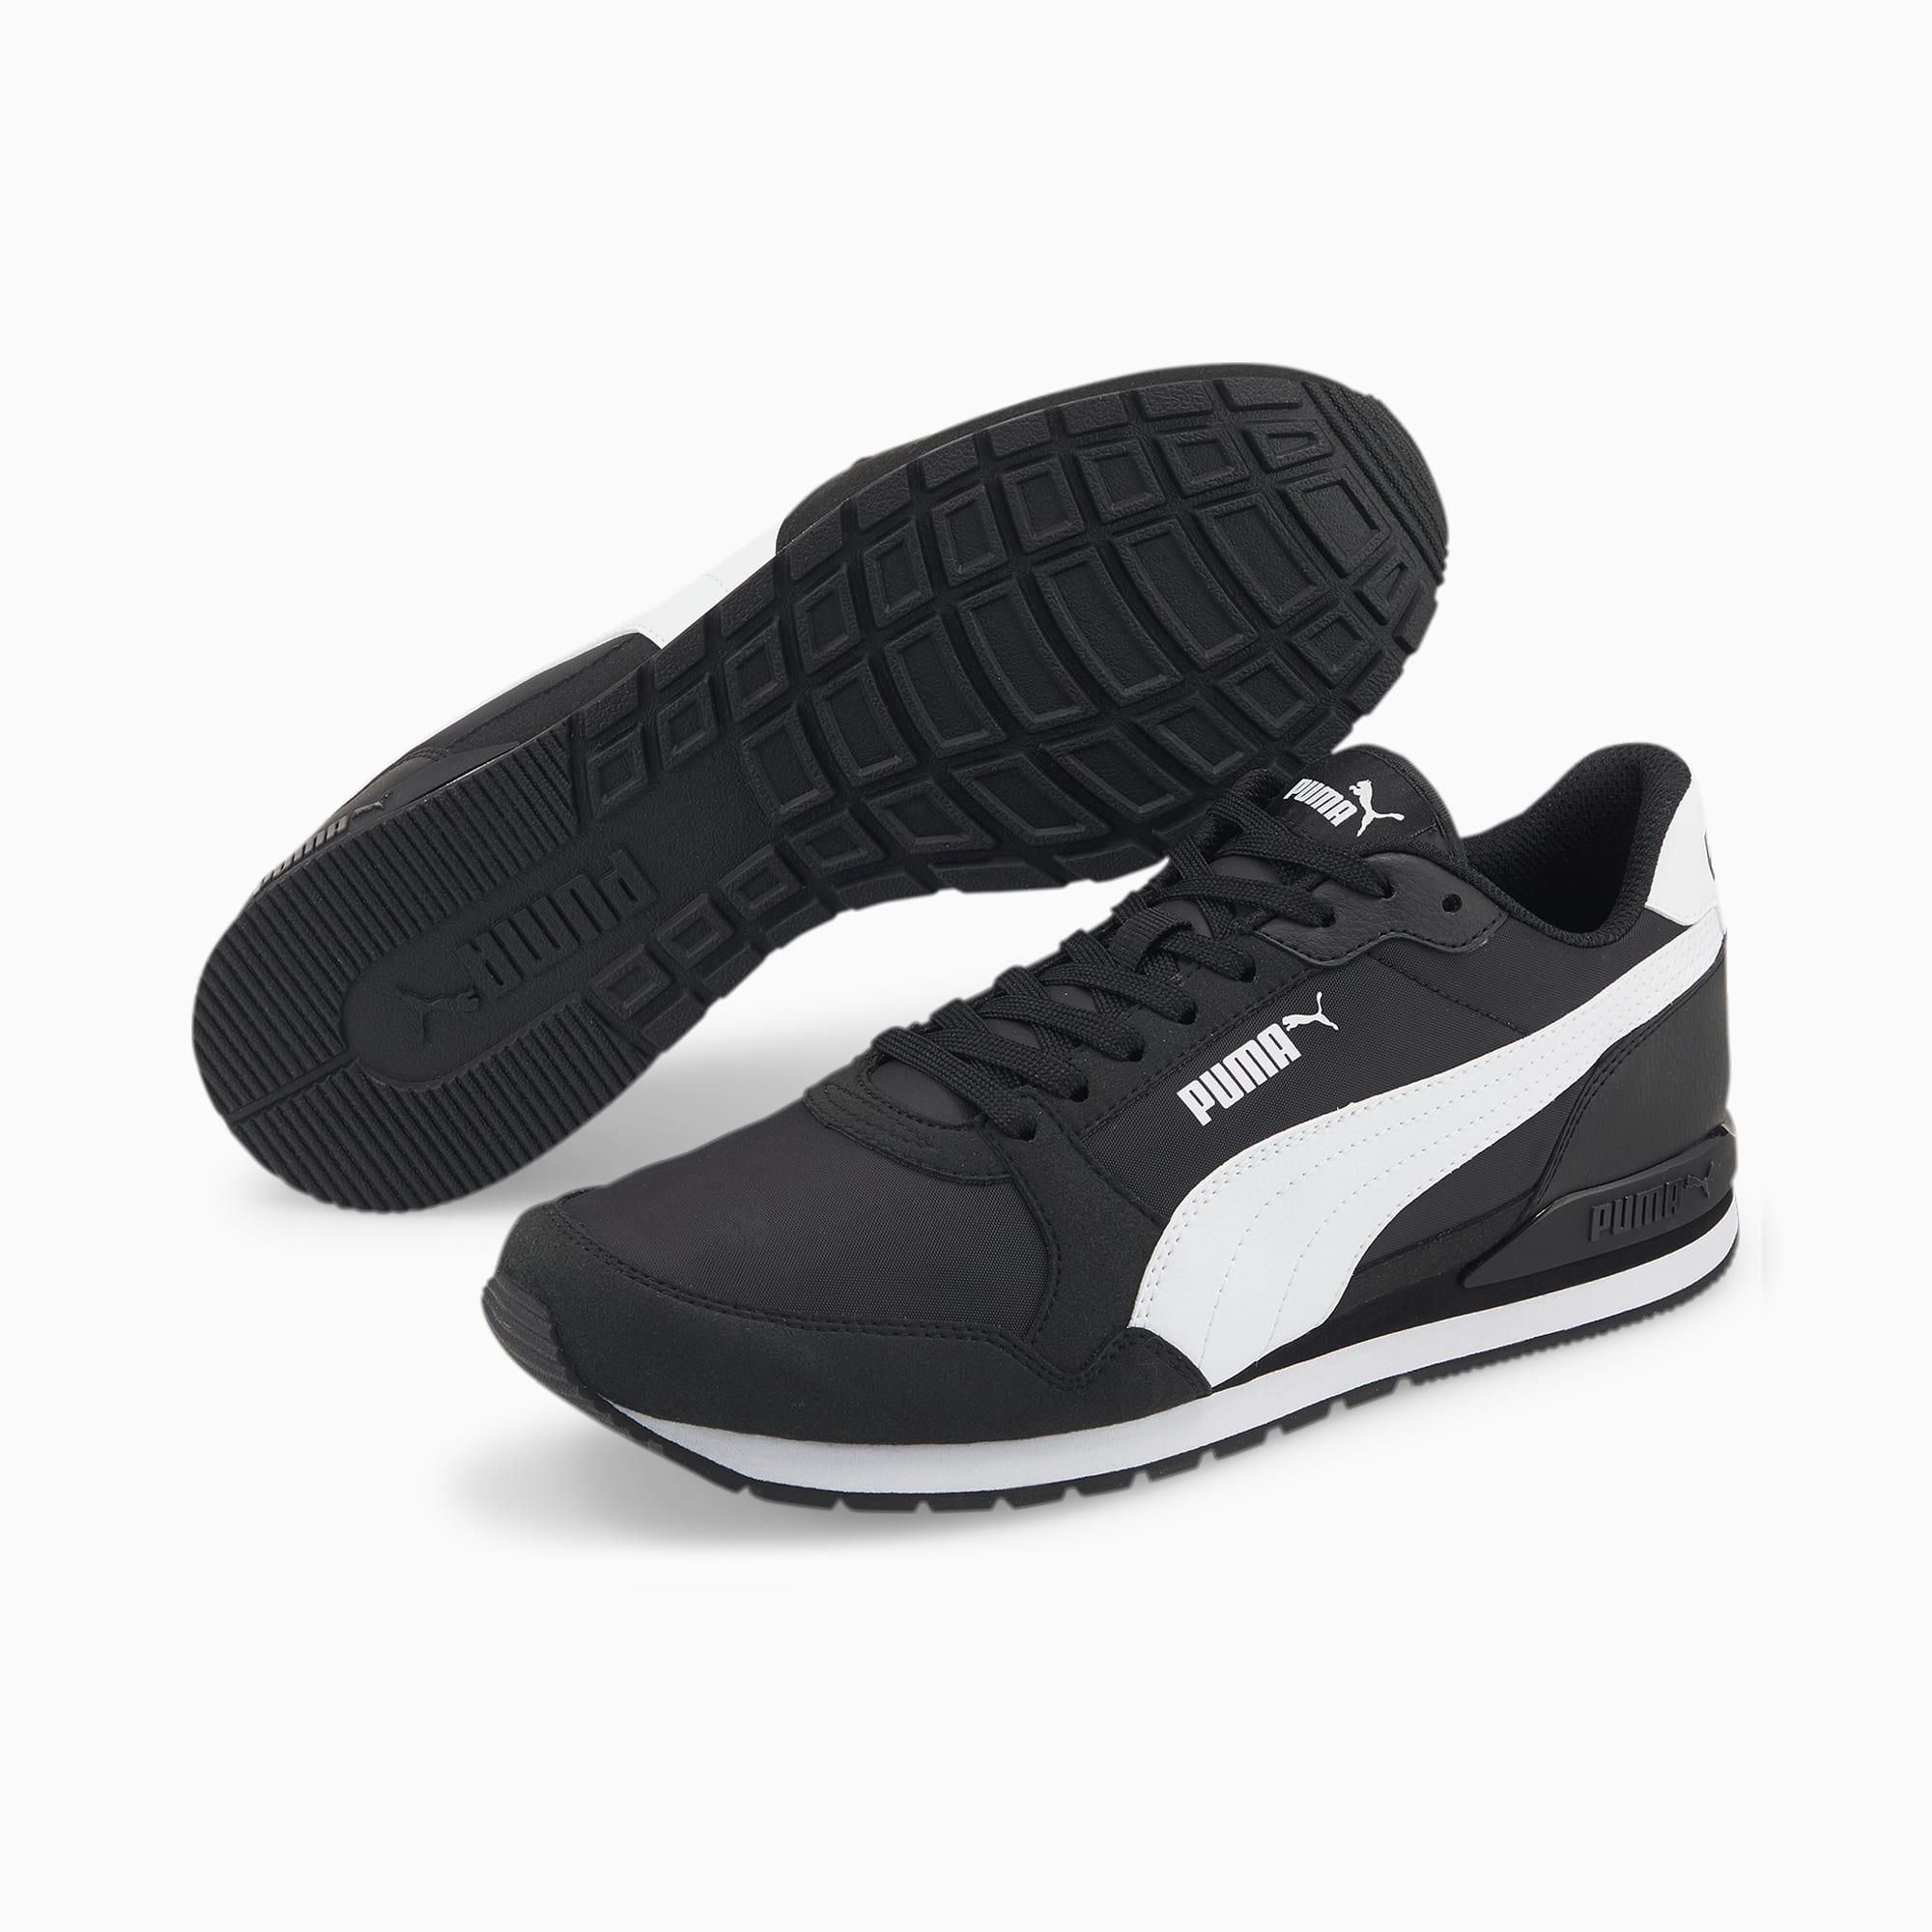 PUMA ST Runner V3 low-top Sneakers - Farfetch